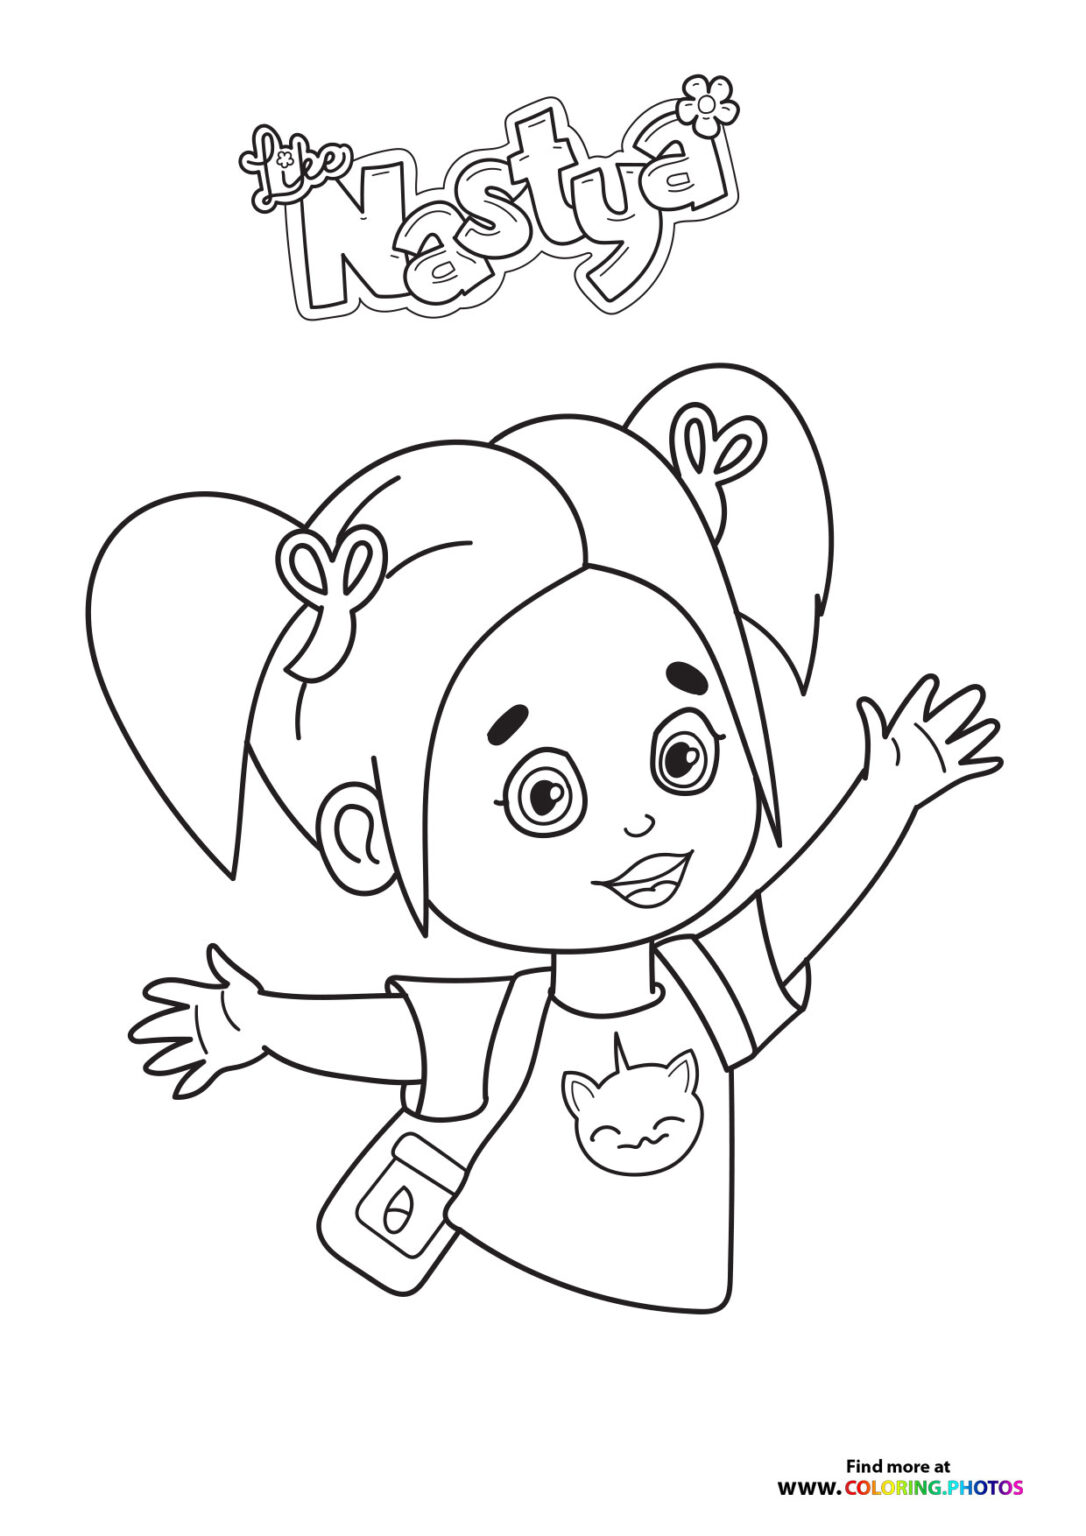 Diana And Roma Coloring Coloring Pages